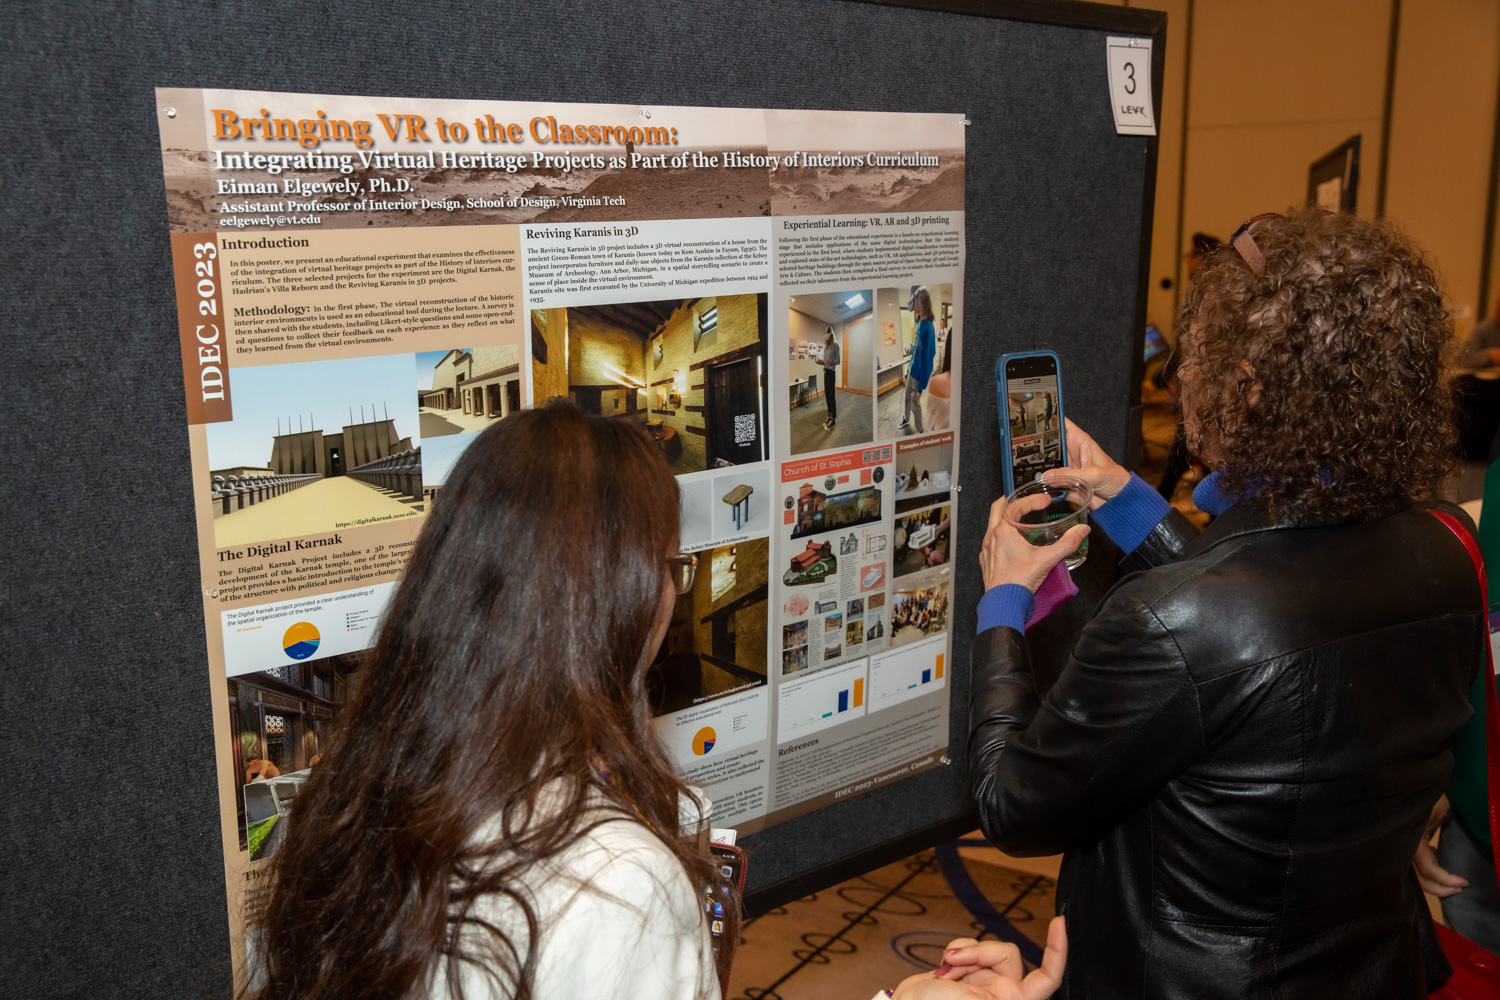 Conference-goers taking a picture of a poster.